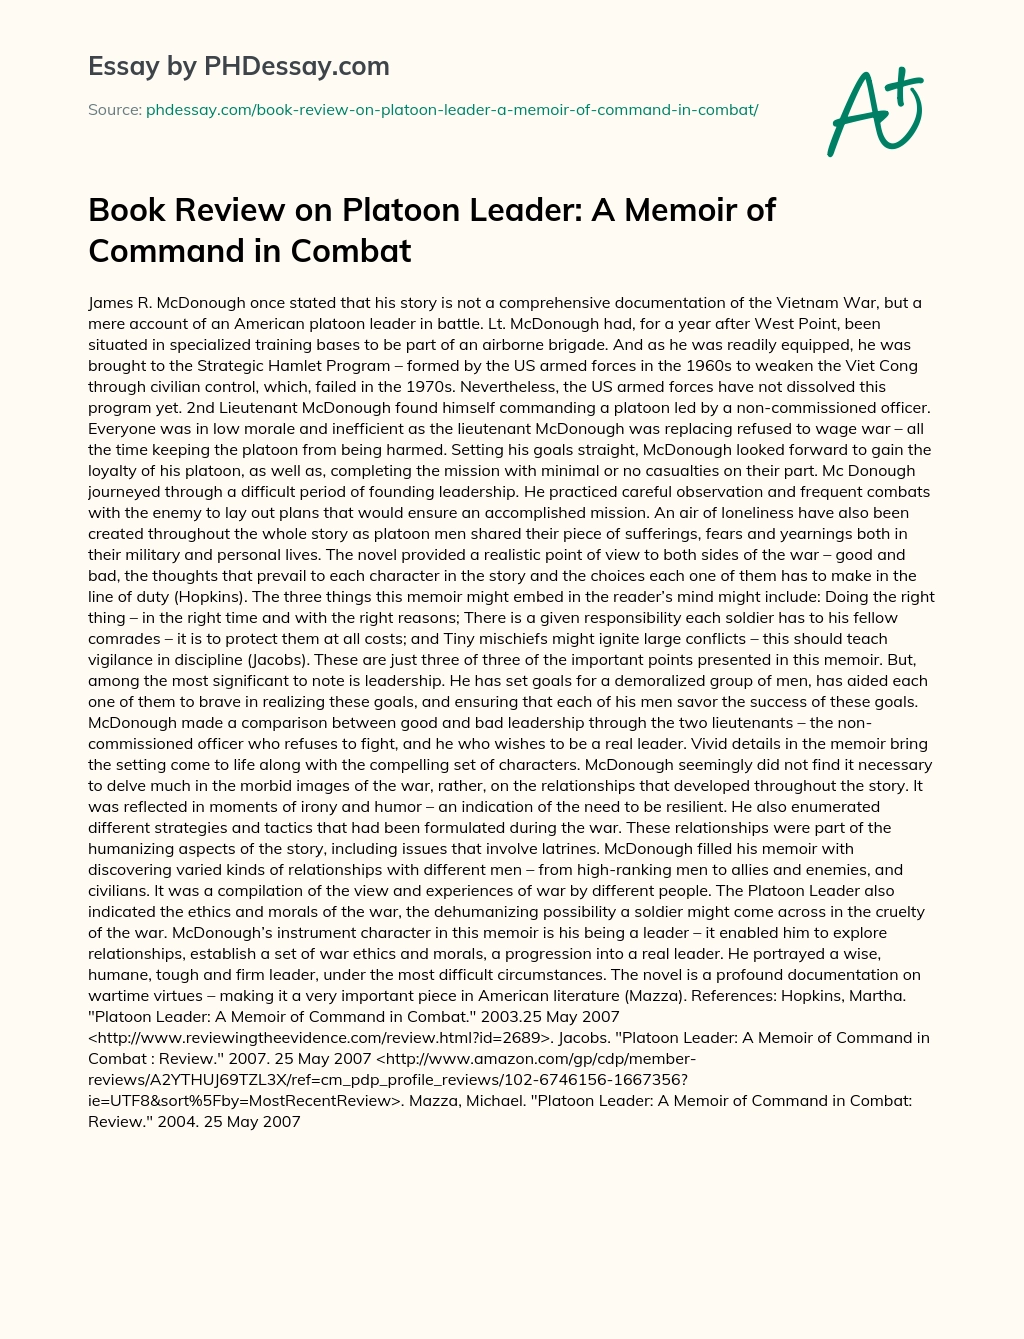 Book Review on  Platoon Leader: A Memoir of Command in Combat essay